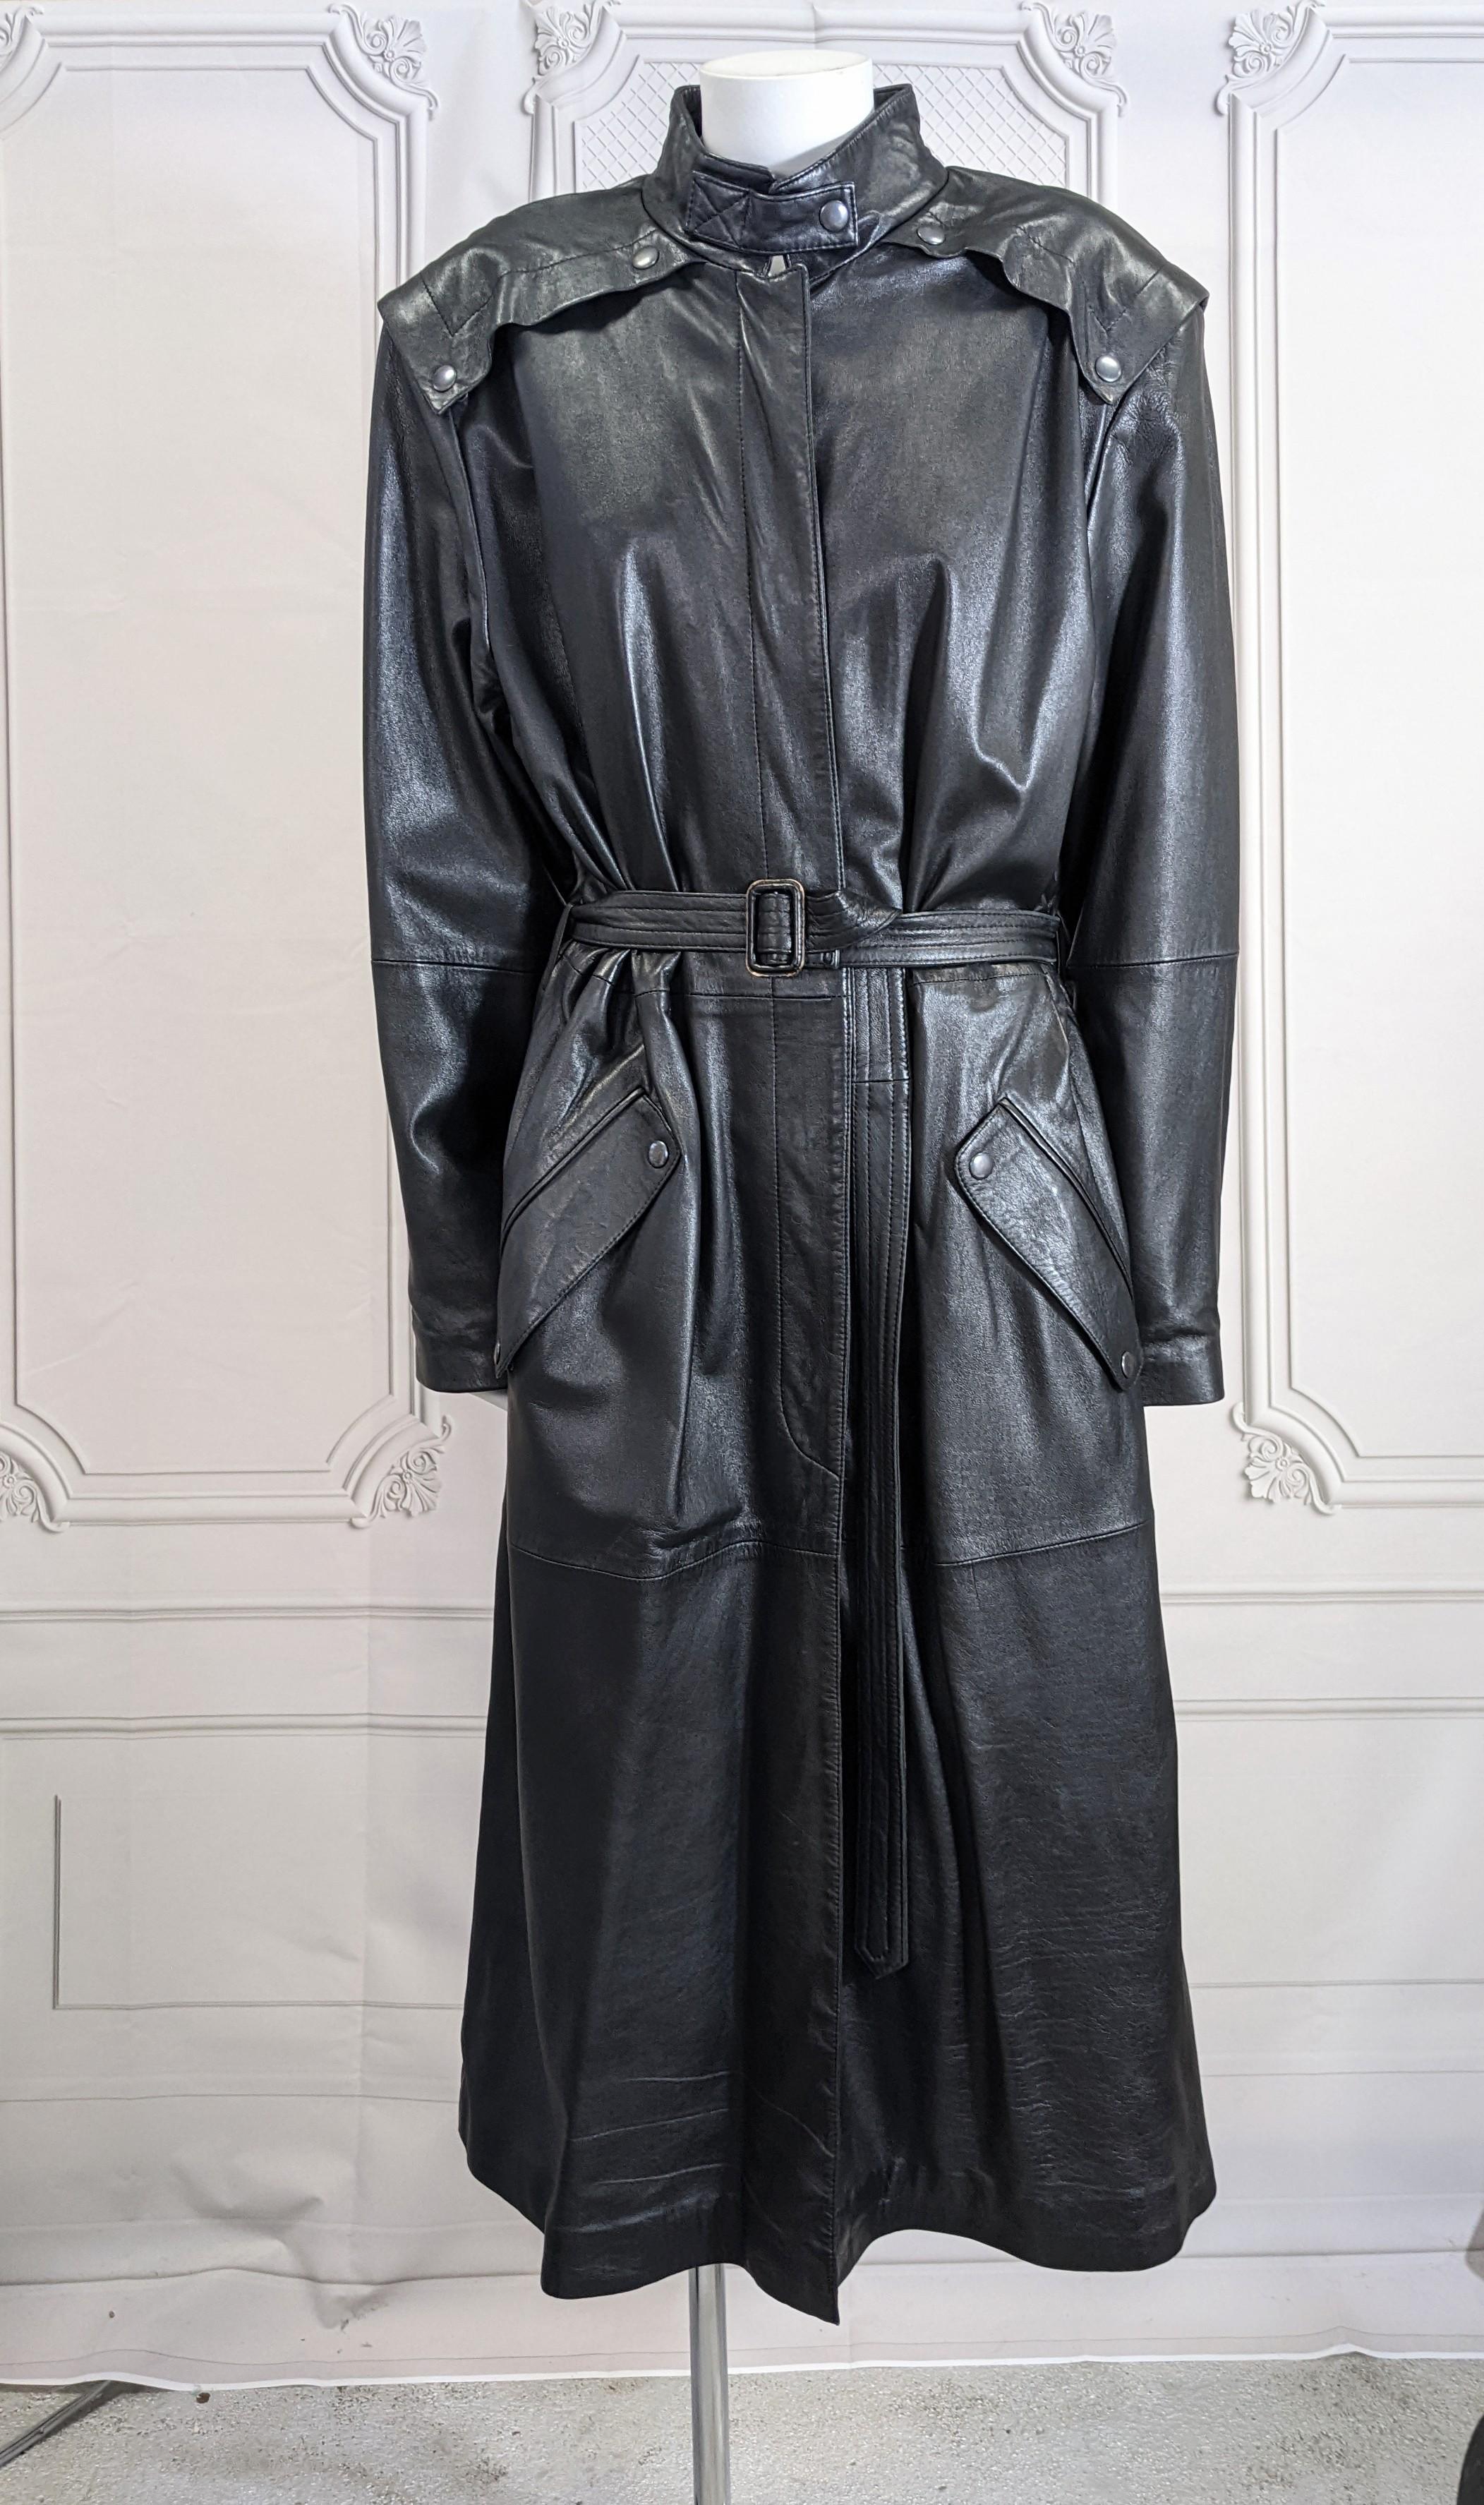 Cool Beged-Or Leather Moto Coat from the 1980's. Oversized cut, sized 12 womens is suitable for men's Medium as well. Balenciaga proportions with large extended shoulders, long sleeves, and super long belt and ample cut. 
Soft calf leather with